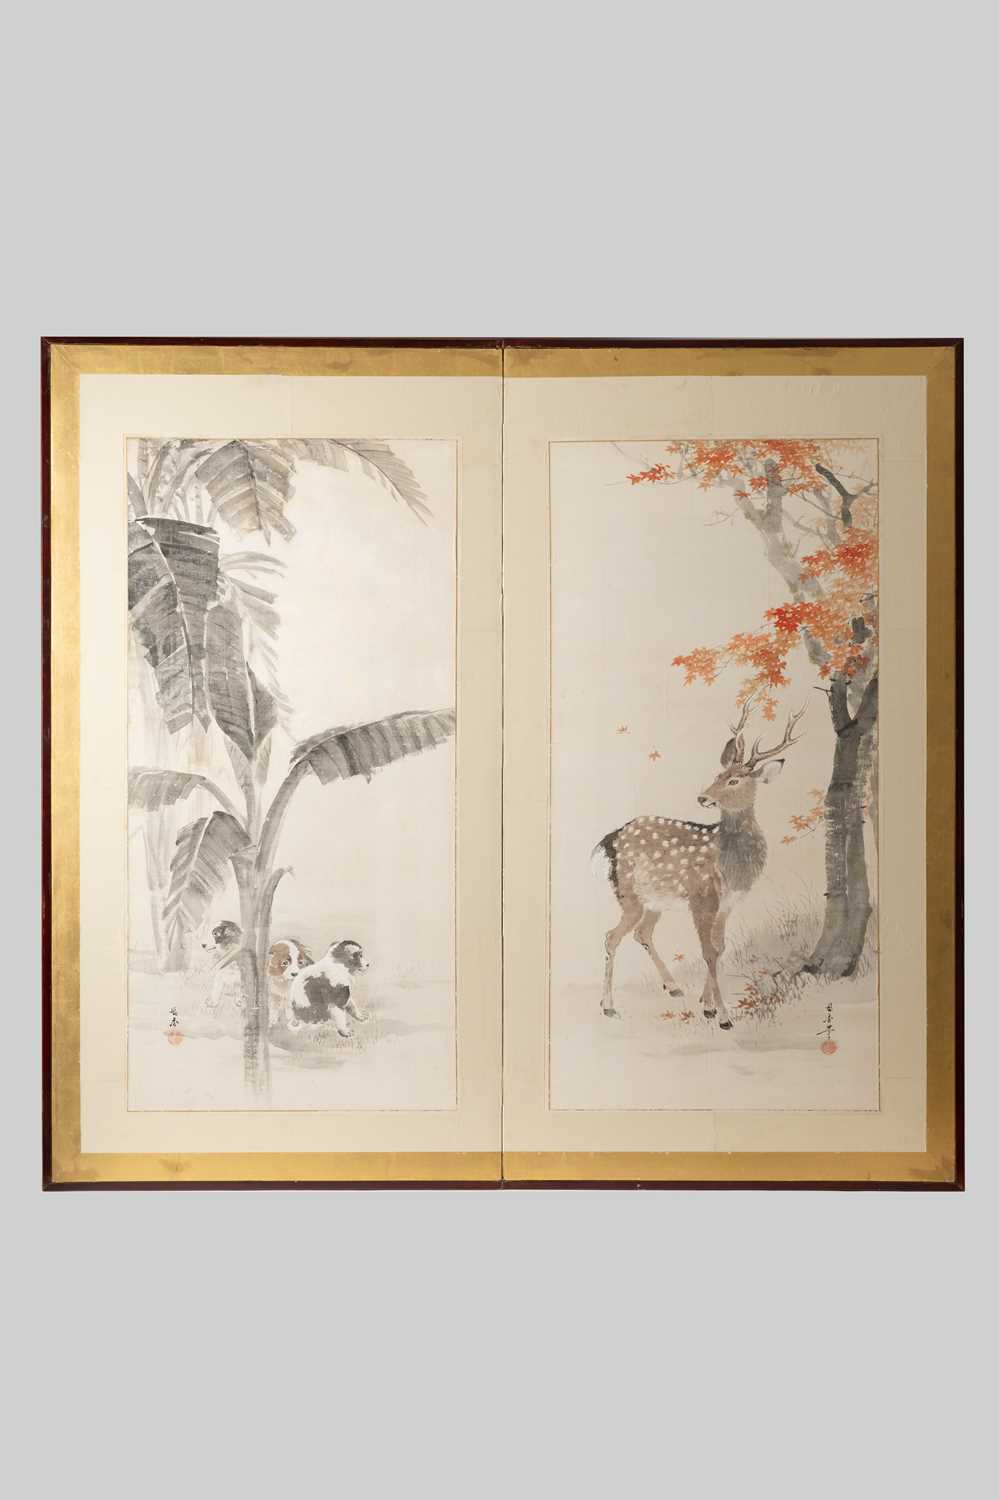 KANO SCHOOL DEER AND PUPPIES TAISHO, 20TH CENTURY A Japanese two-fold byōbu (paper screen) painted